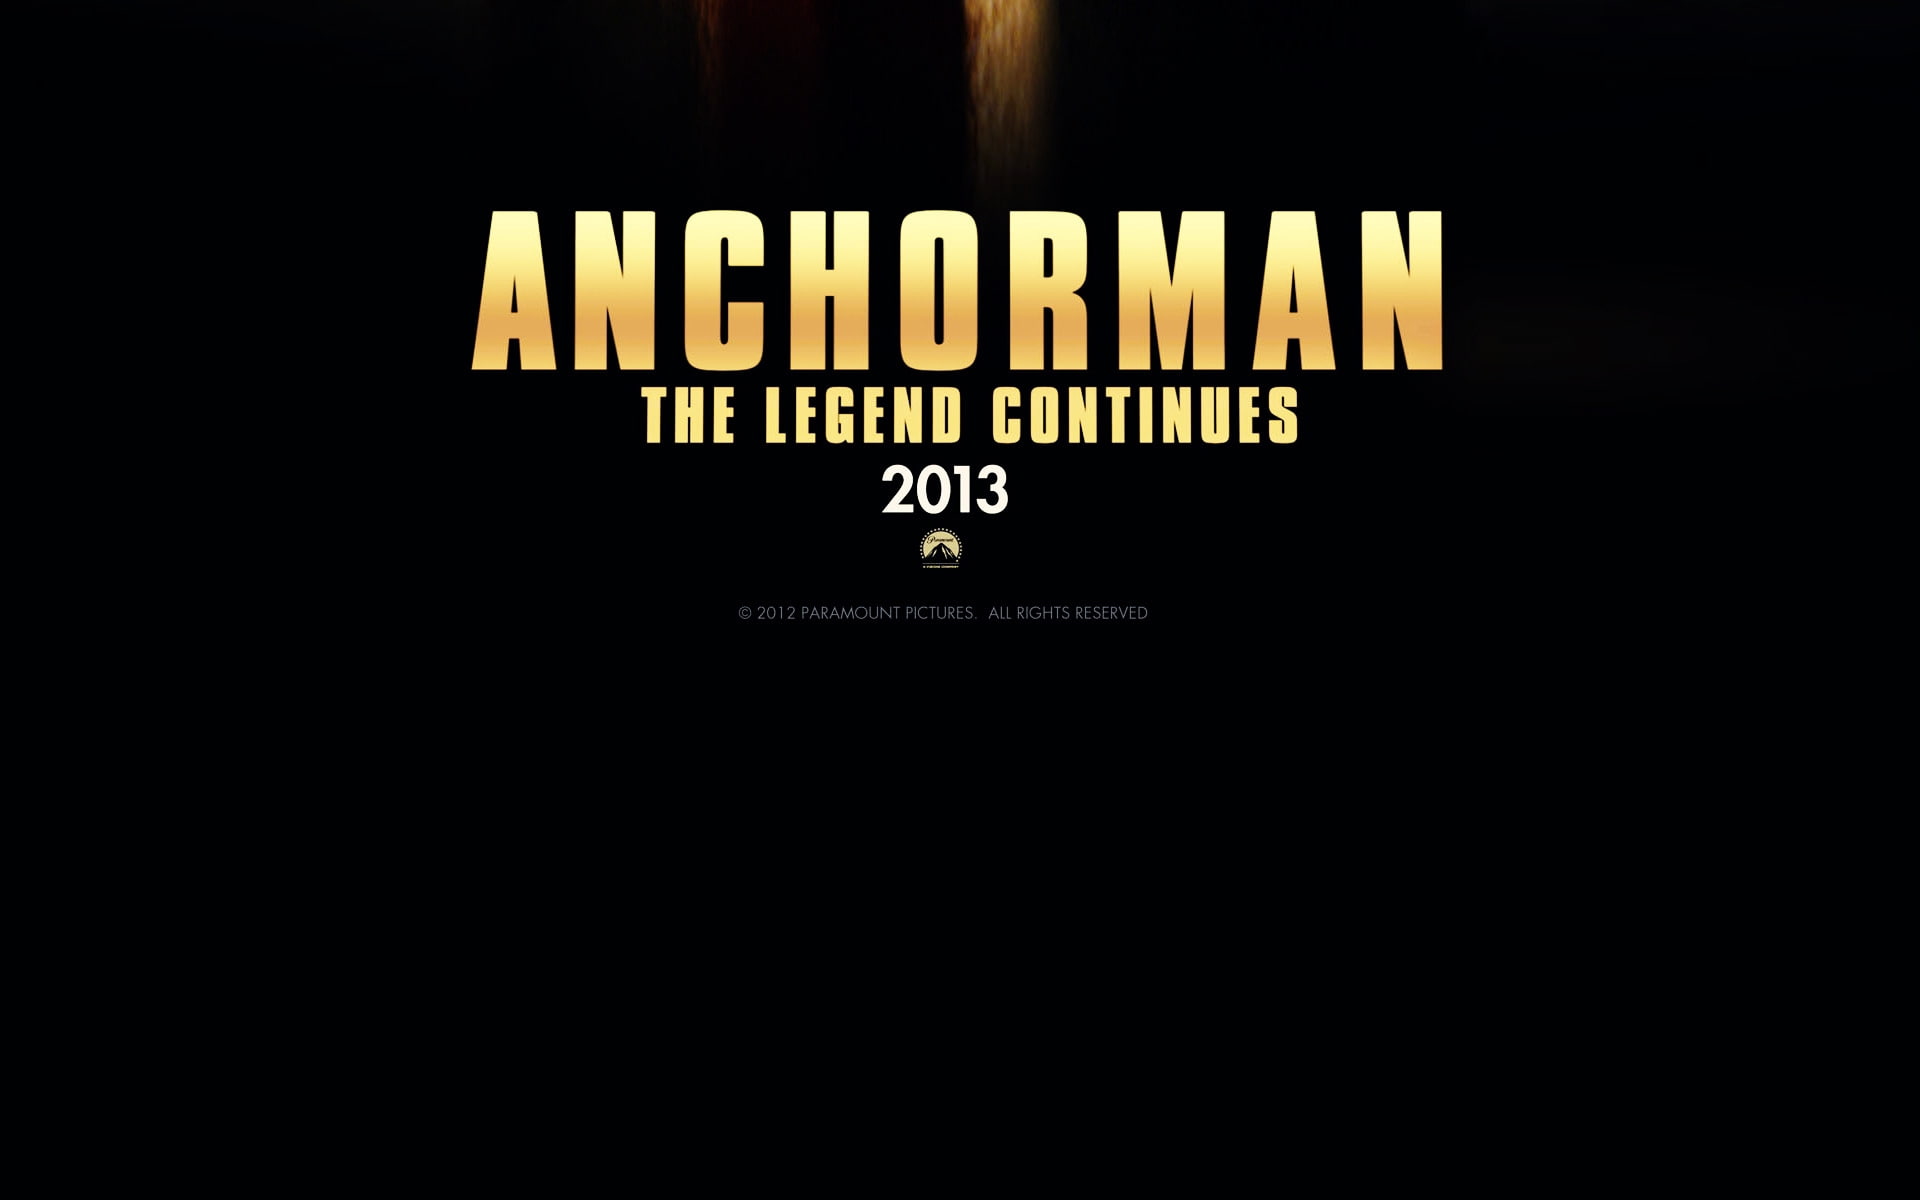 2013 Anchorman The Legend Continues, The Legend Continues film